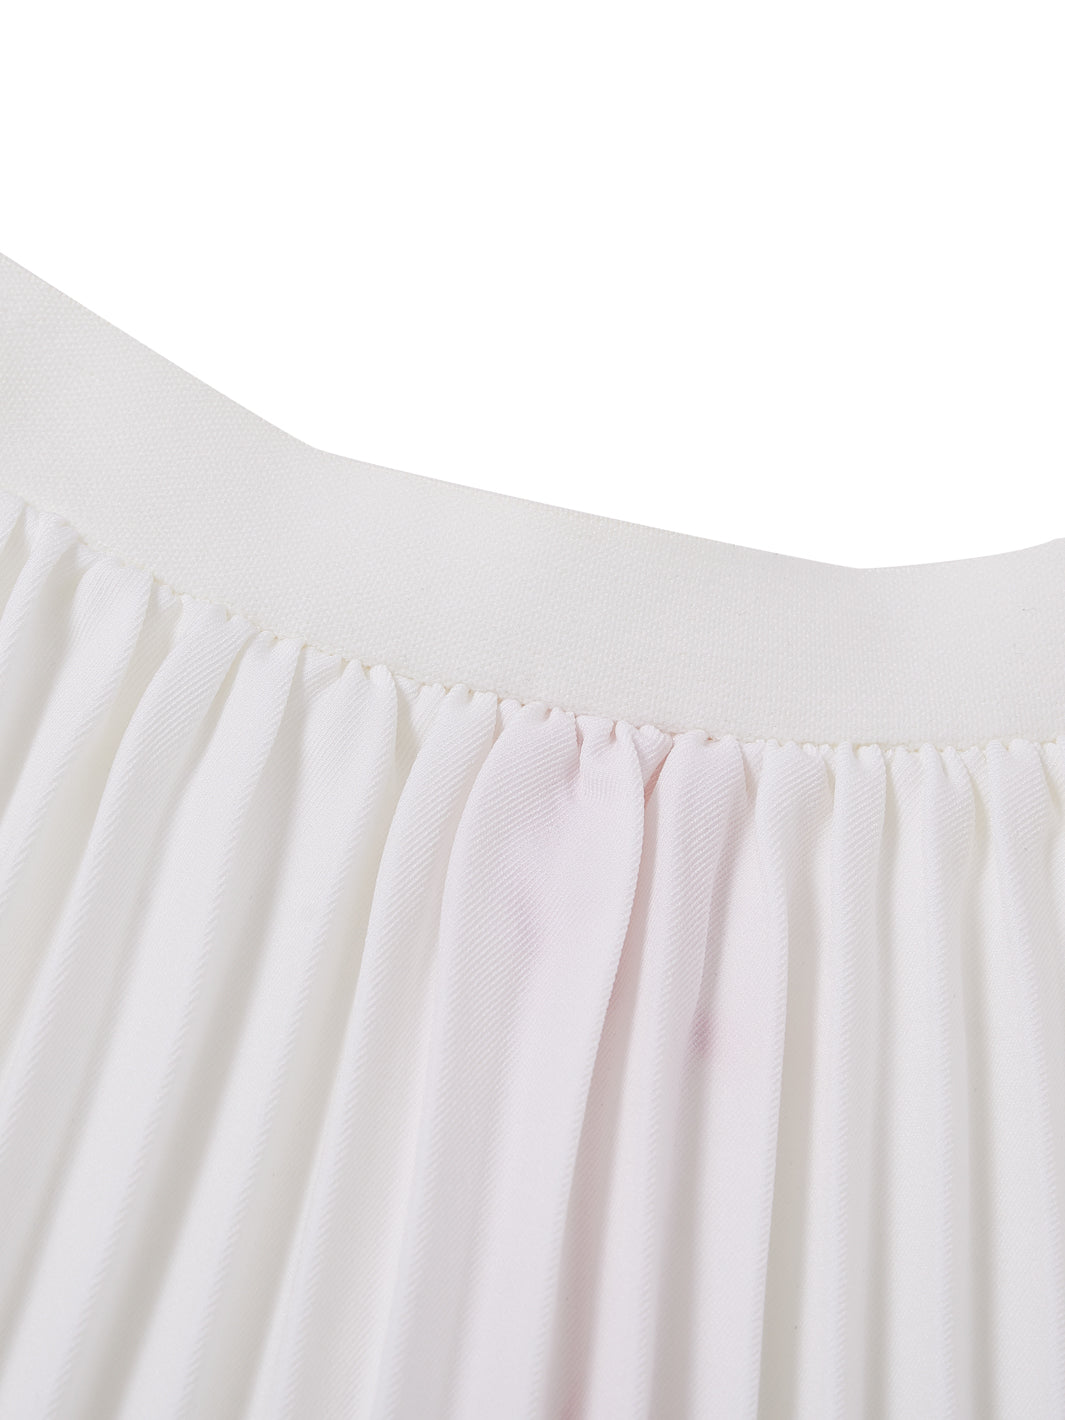 Solid Accordion Pleated Skirt - Winter white